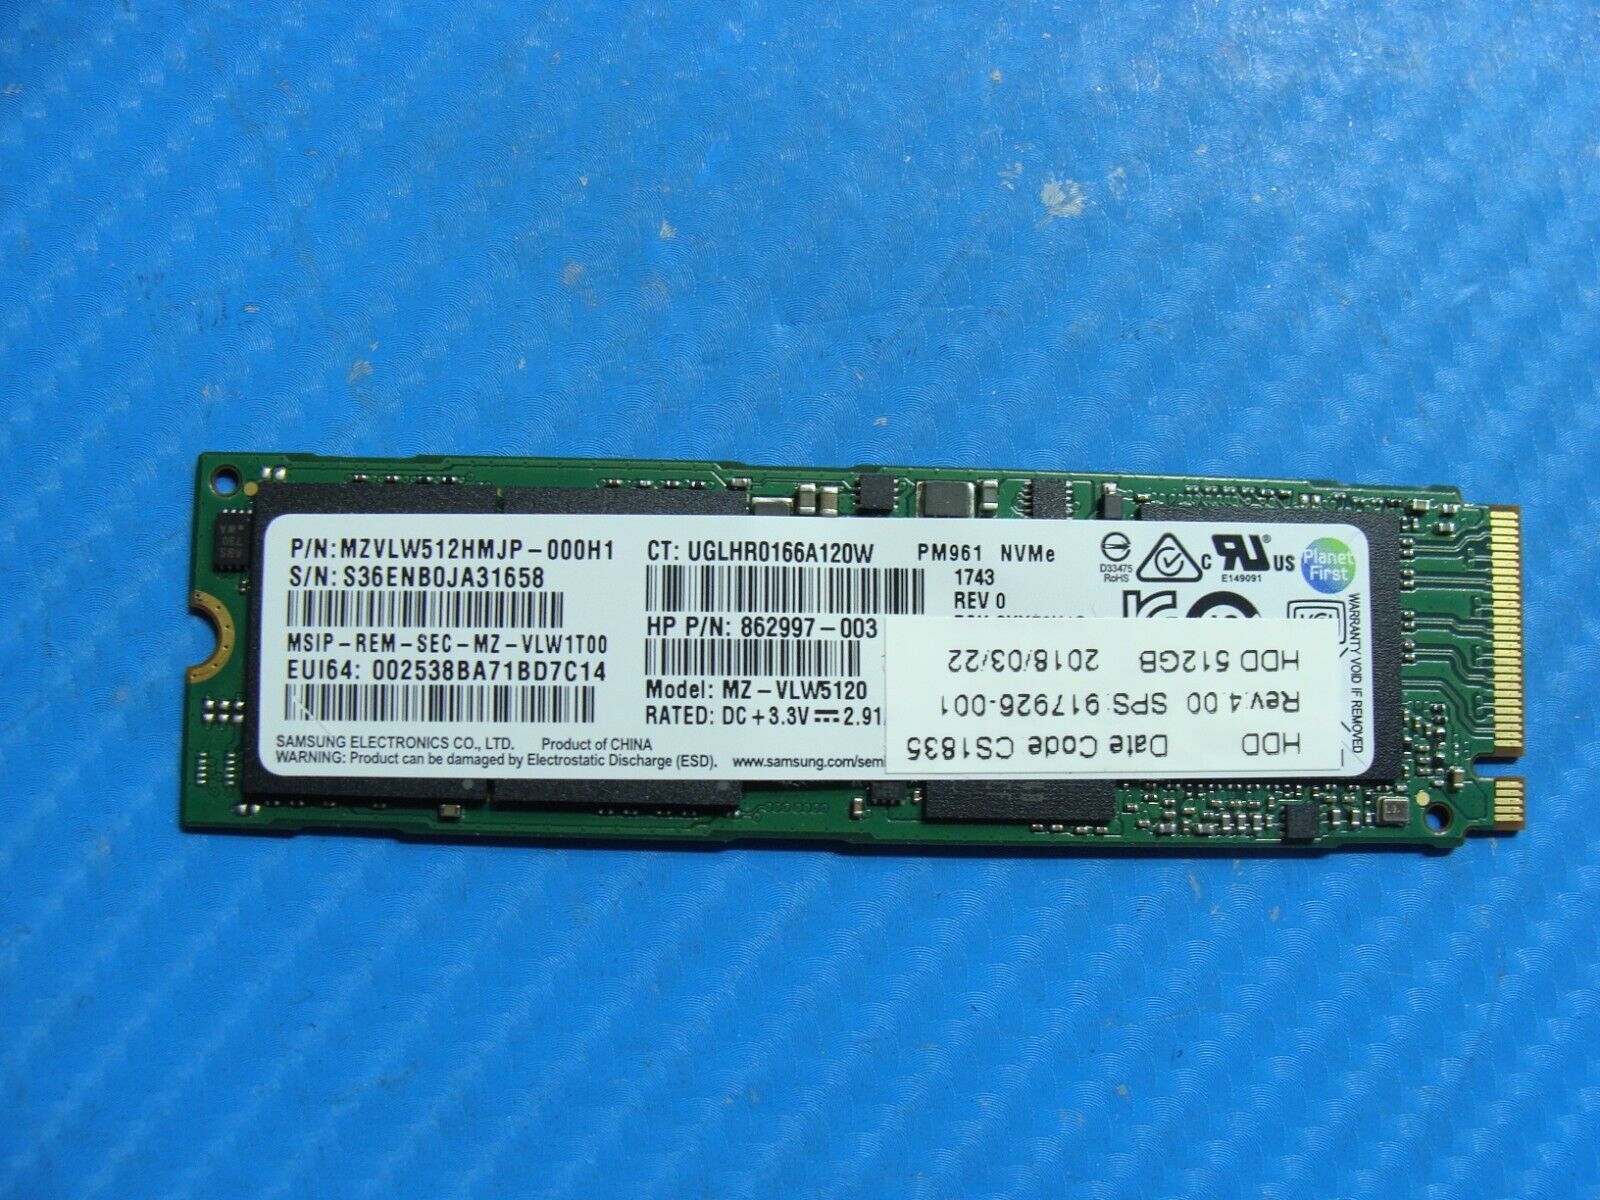 HP 1030 G2 Samsung 512GB NVMe M.2 SSD Solid State Drive MZVLW512HMJP-000H1